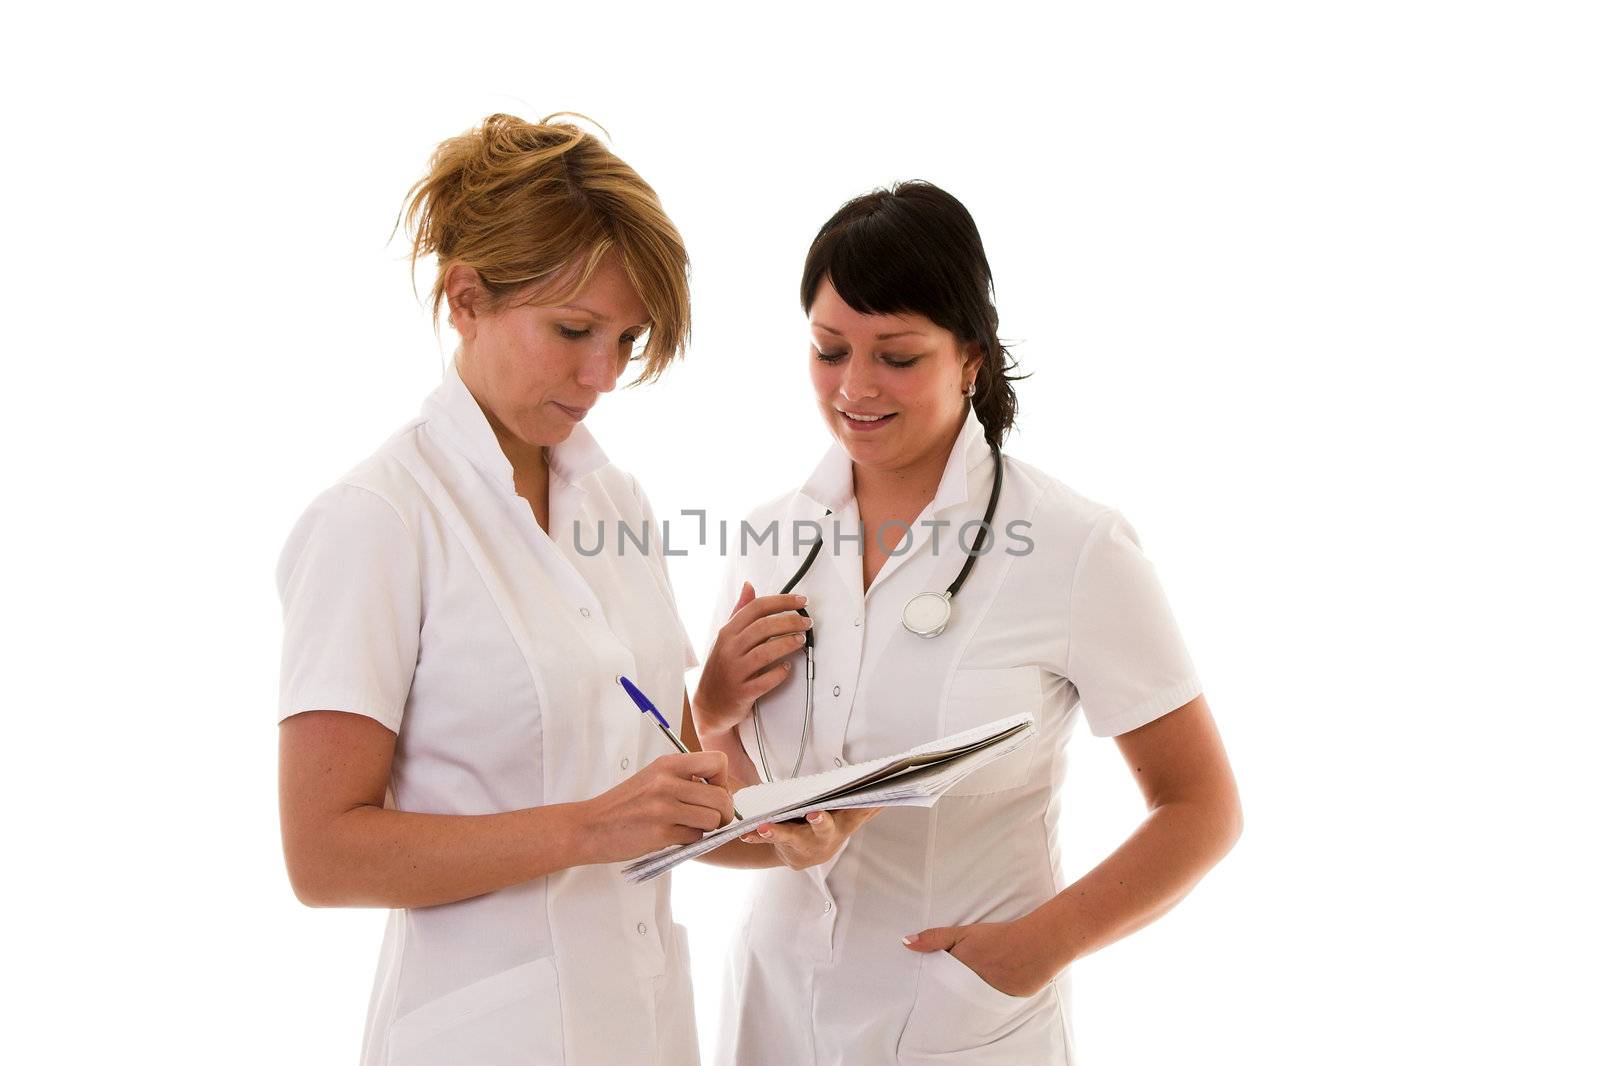 Two nurses standing together discussing patients